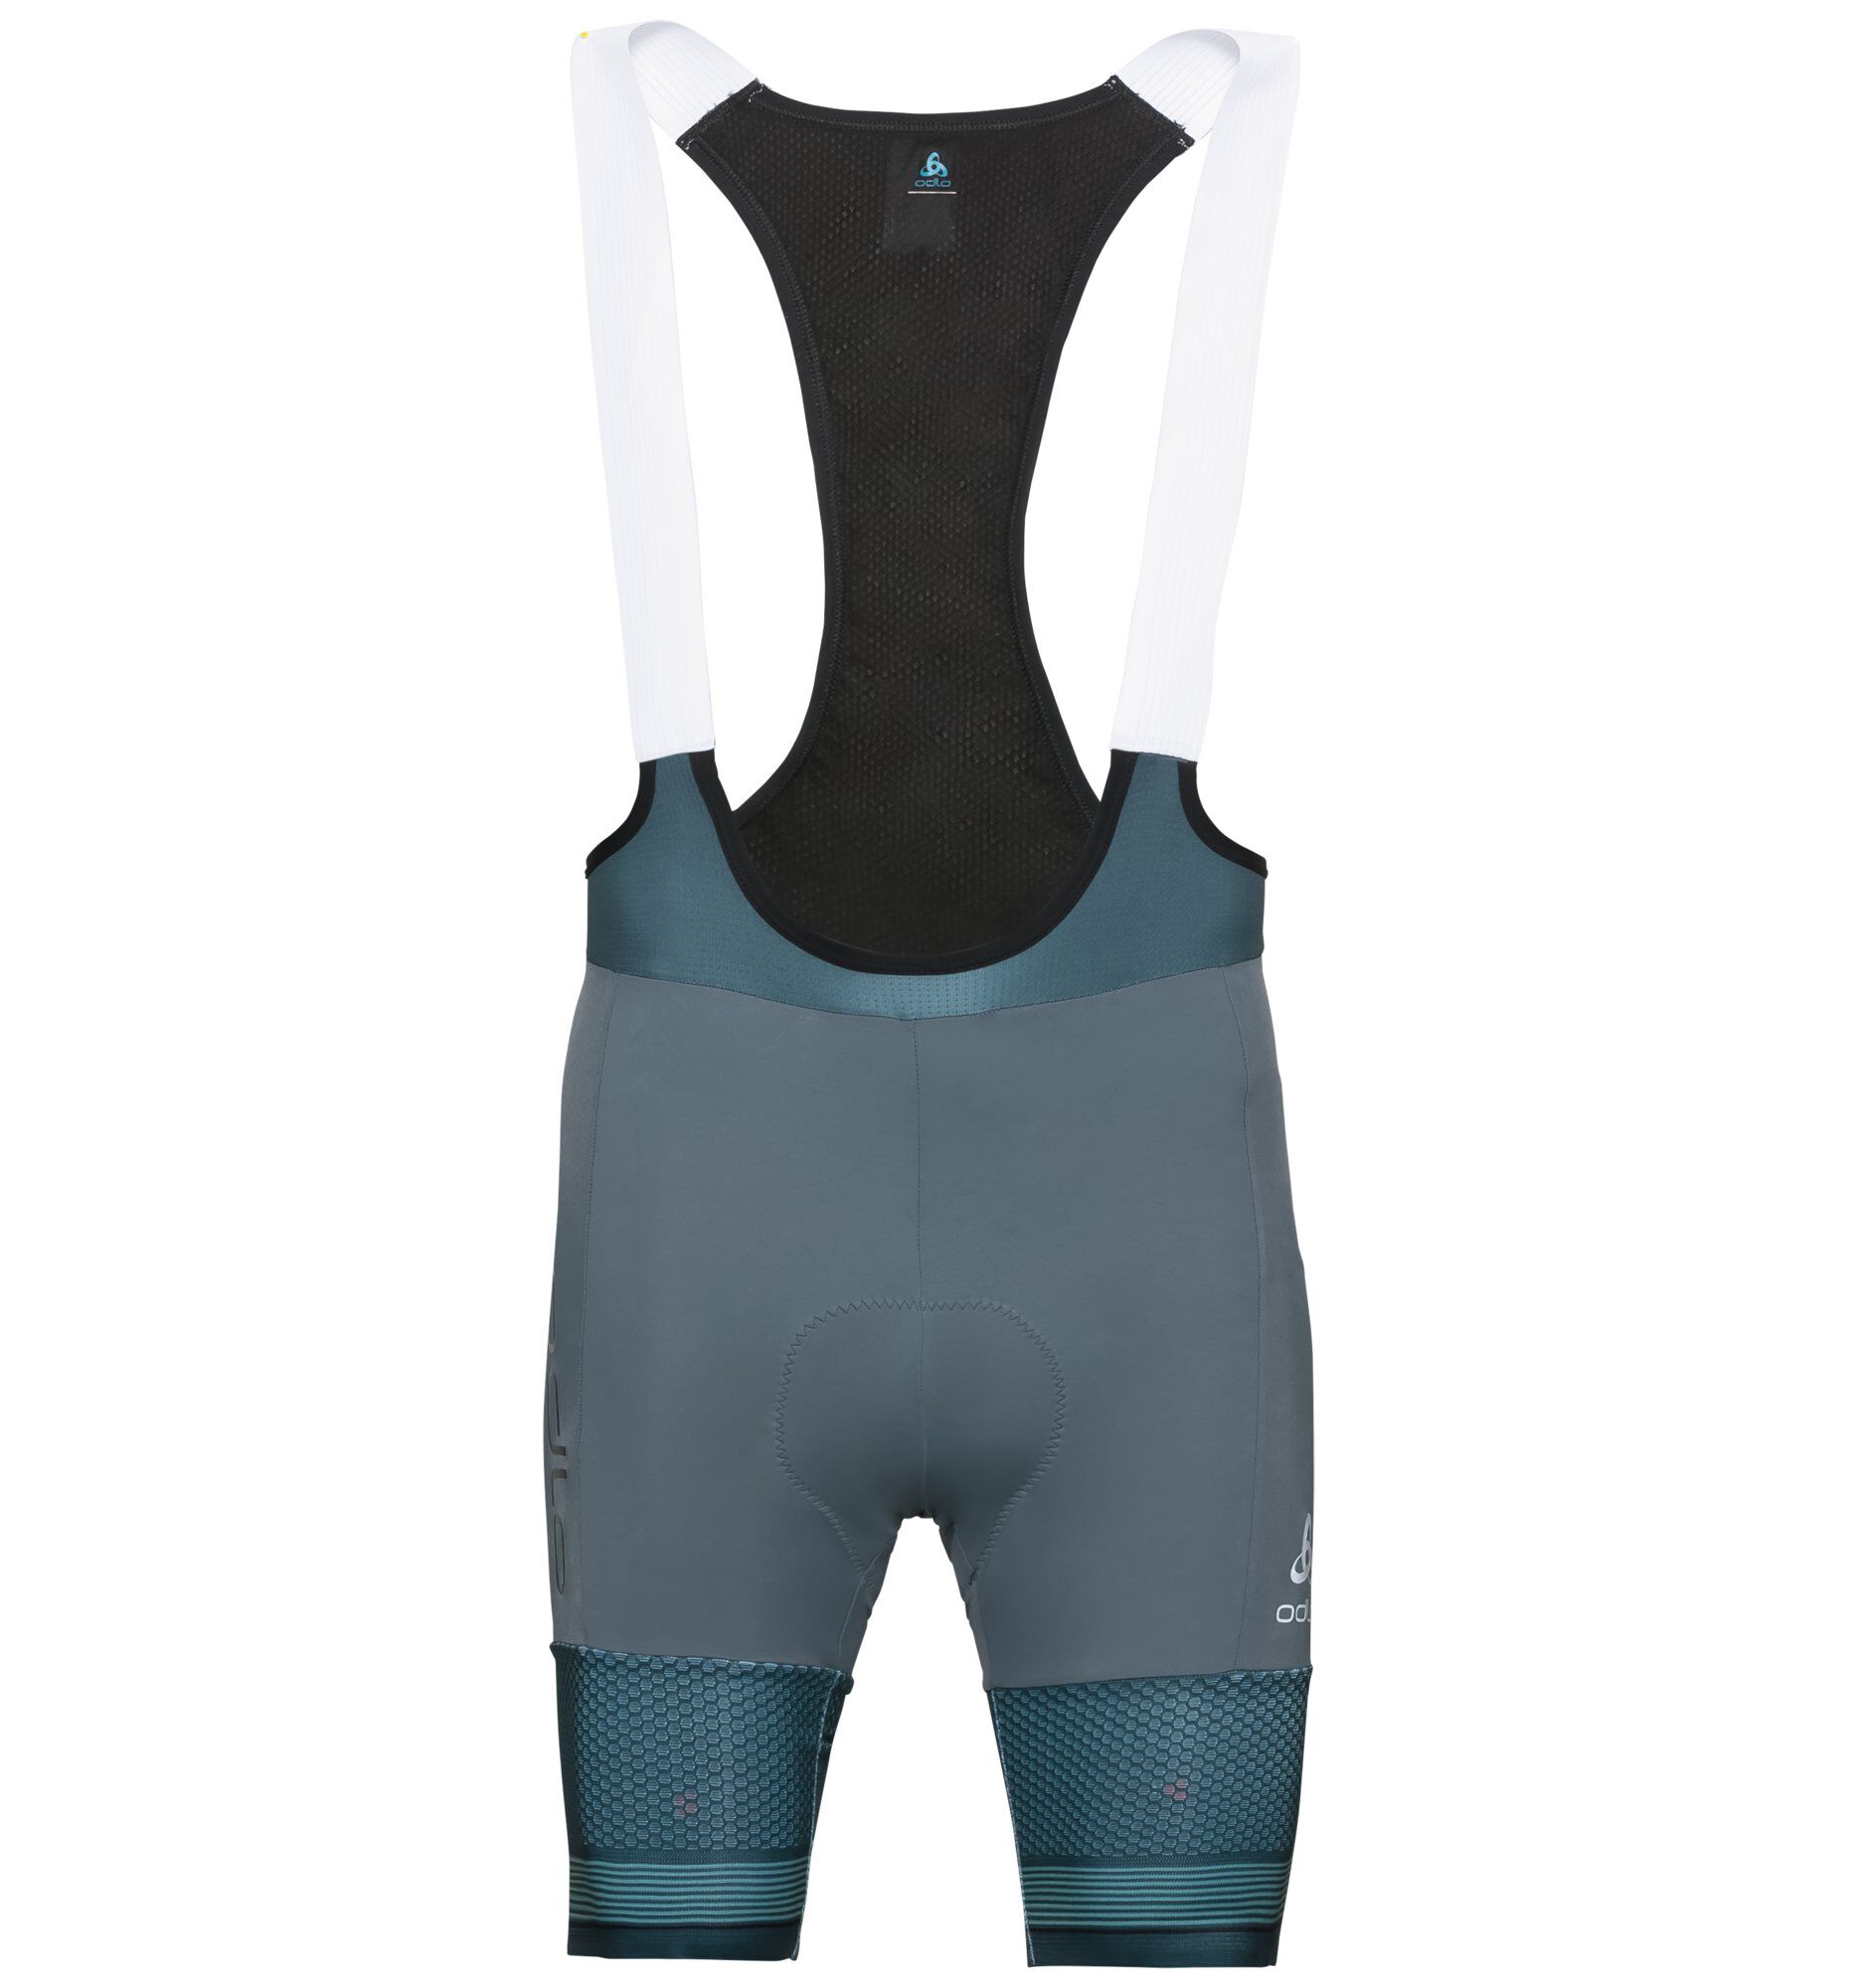 Odlo - Zeroweight Ceramicool Pro - Cycling tights - Men's